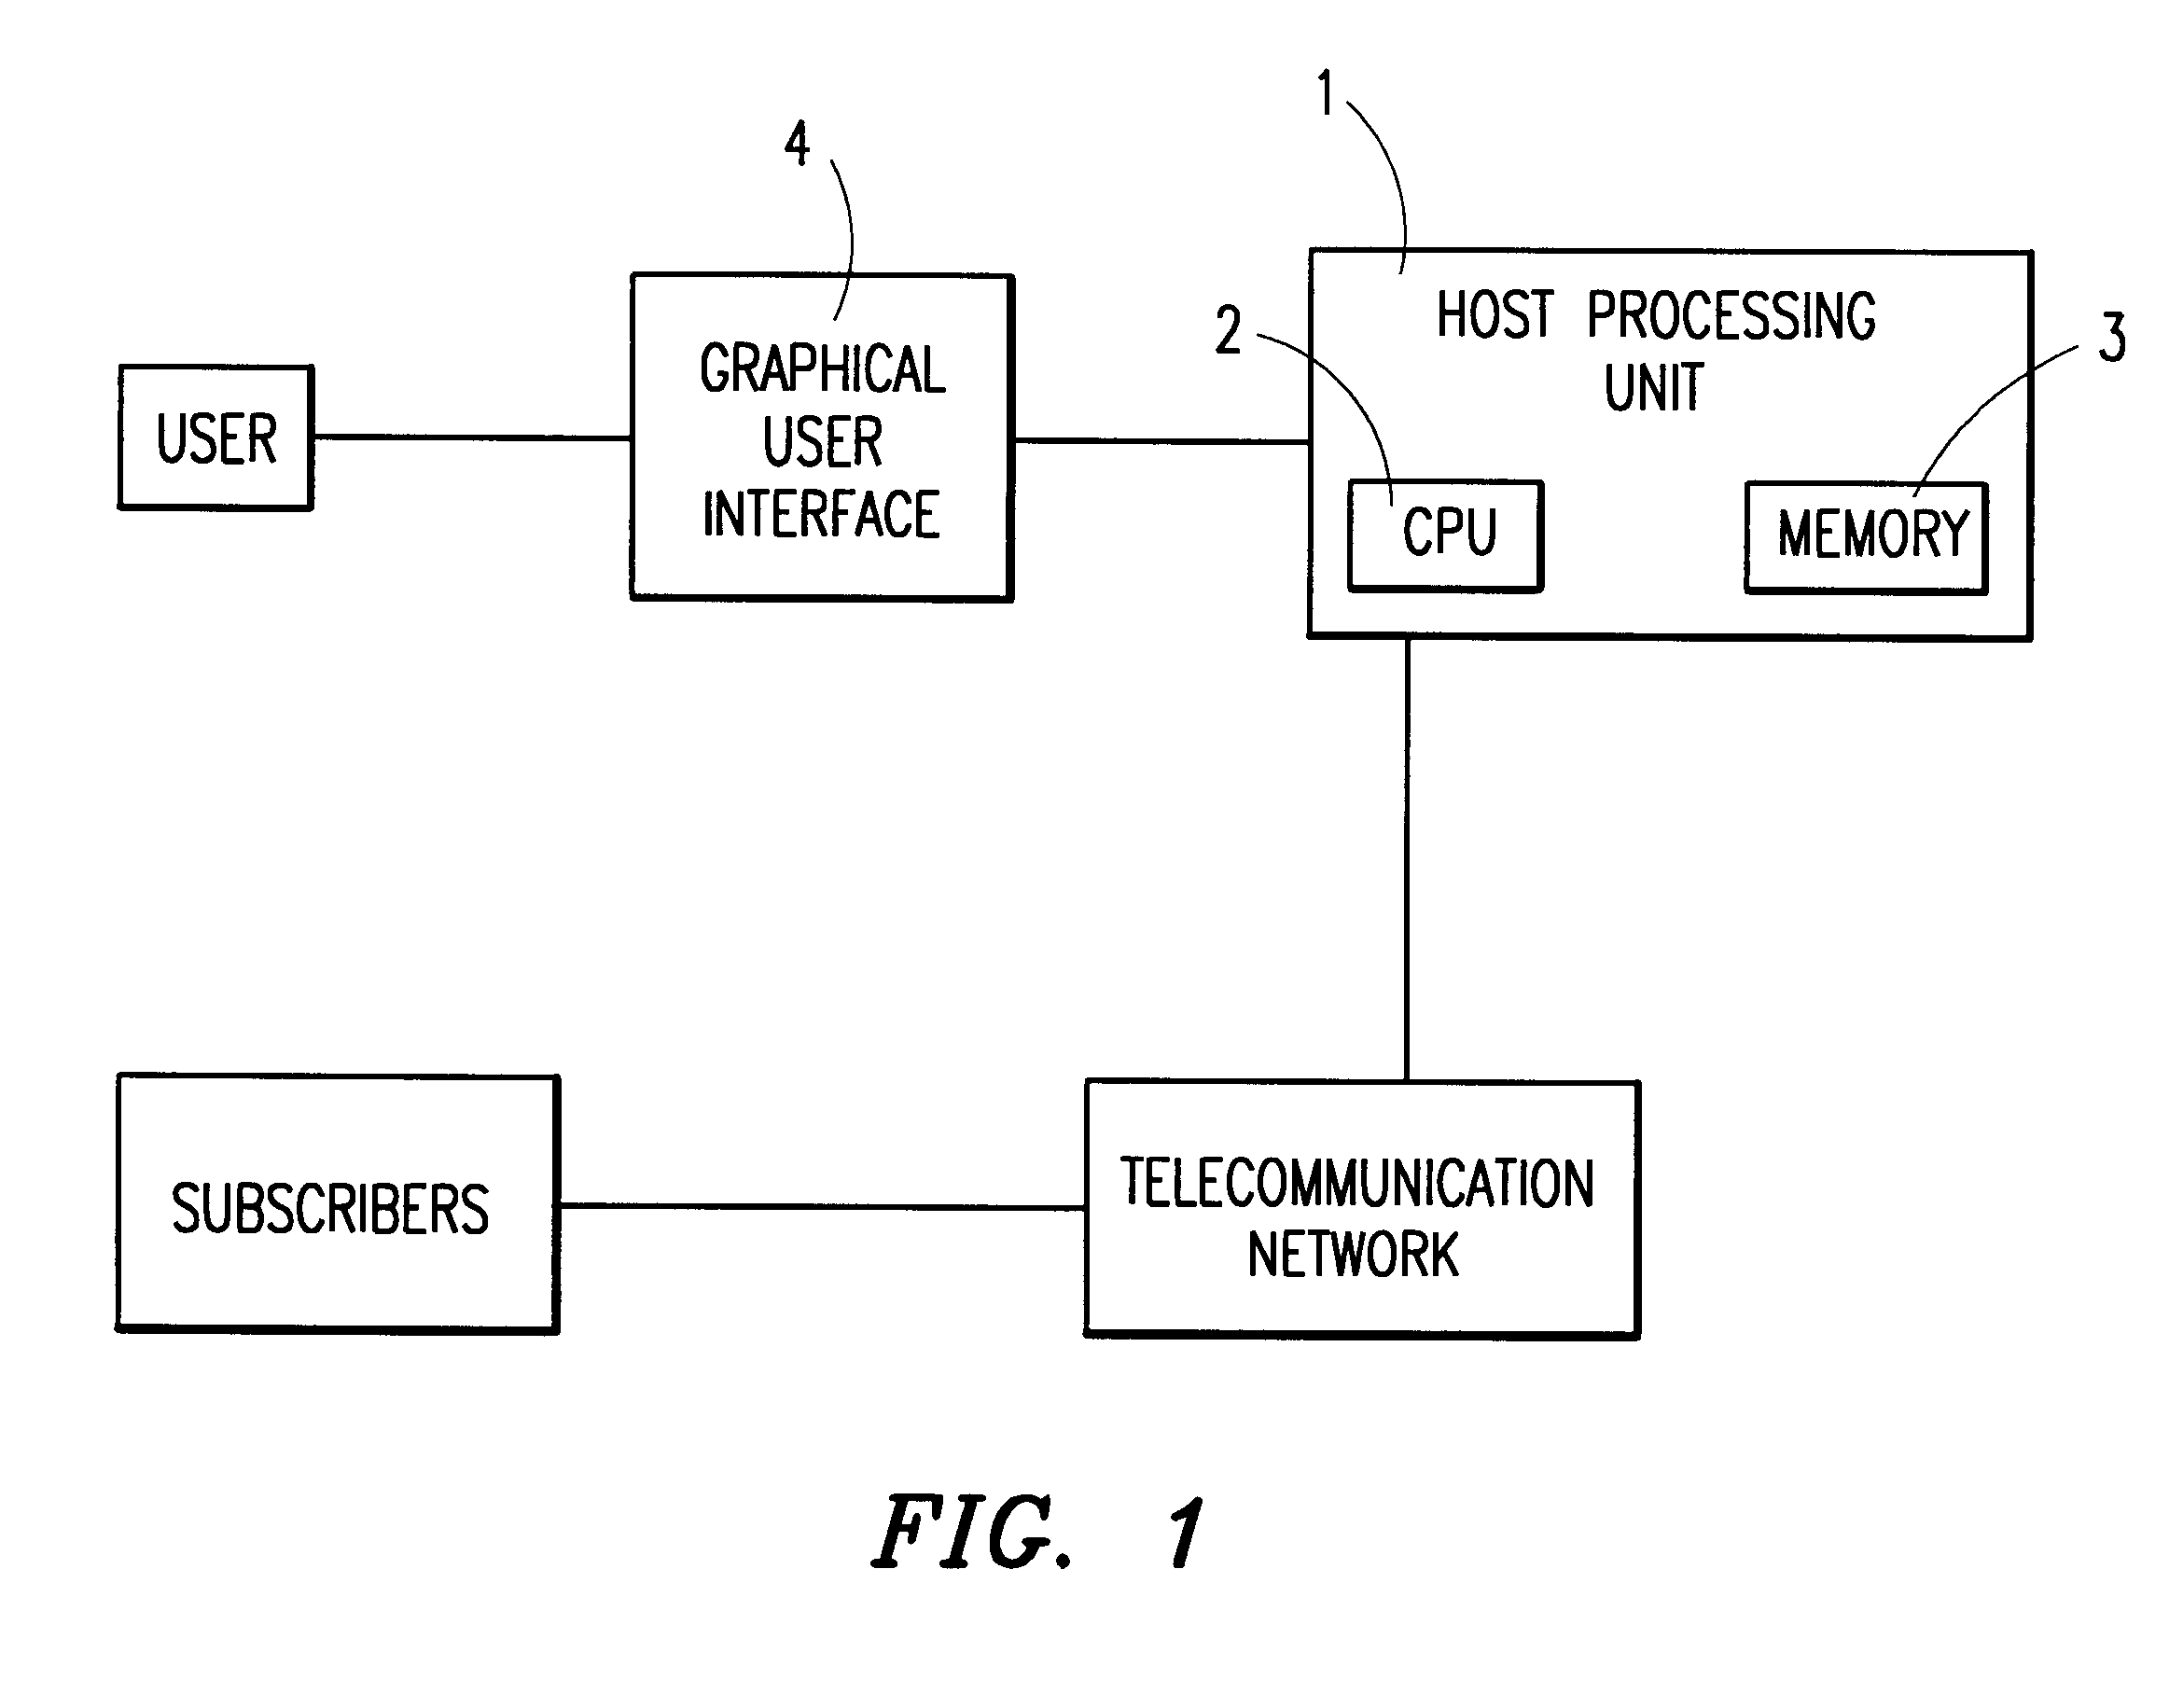 System and method for providing text descriptions to electronic databases